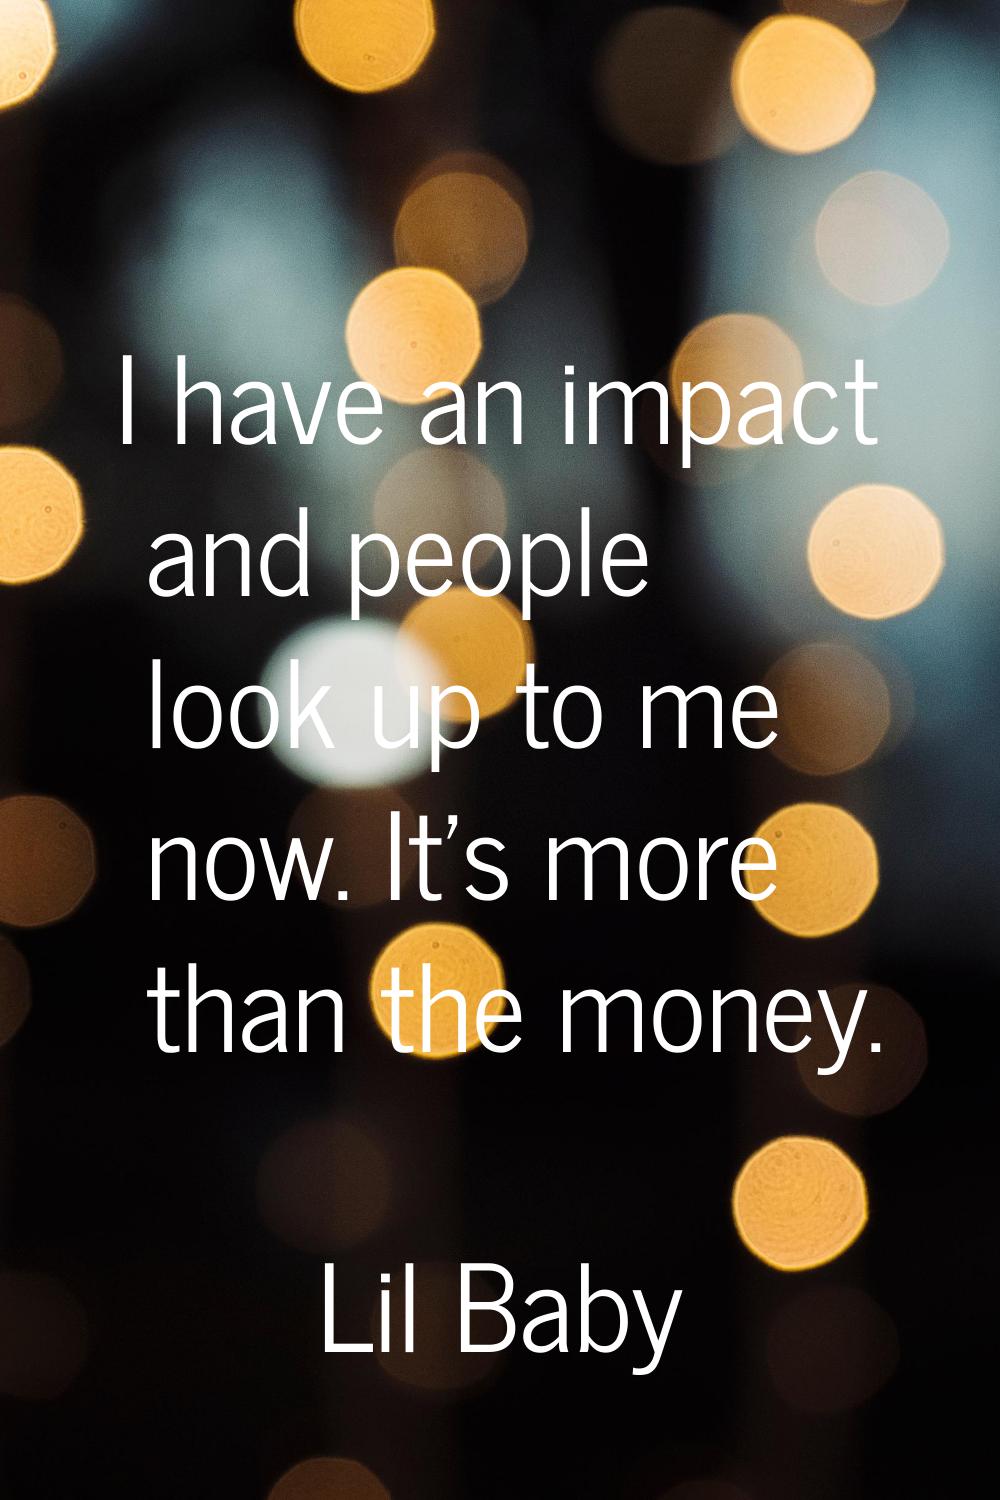 I have an impact and people look up to me now. It's more than the money.